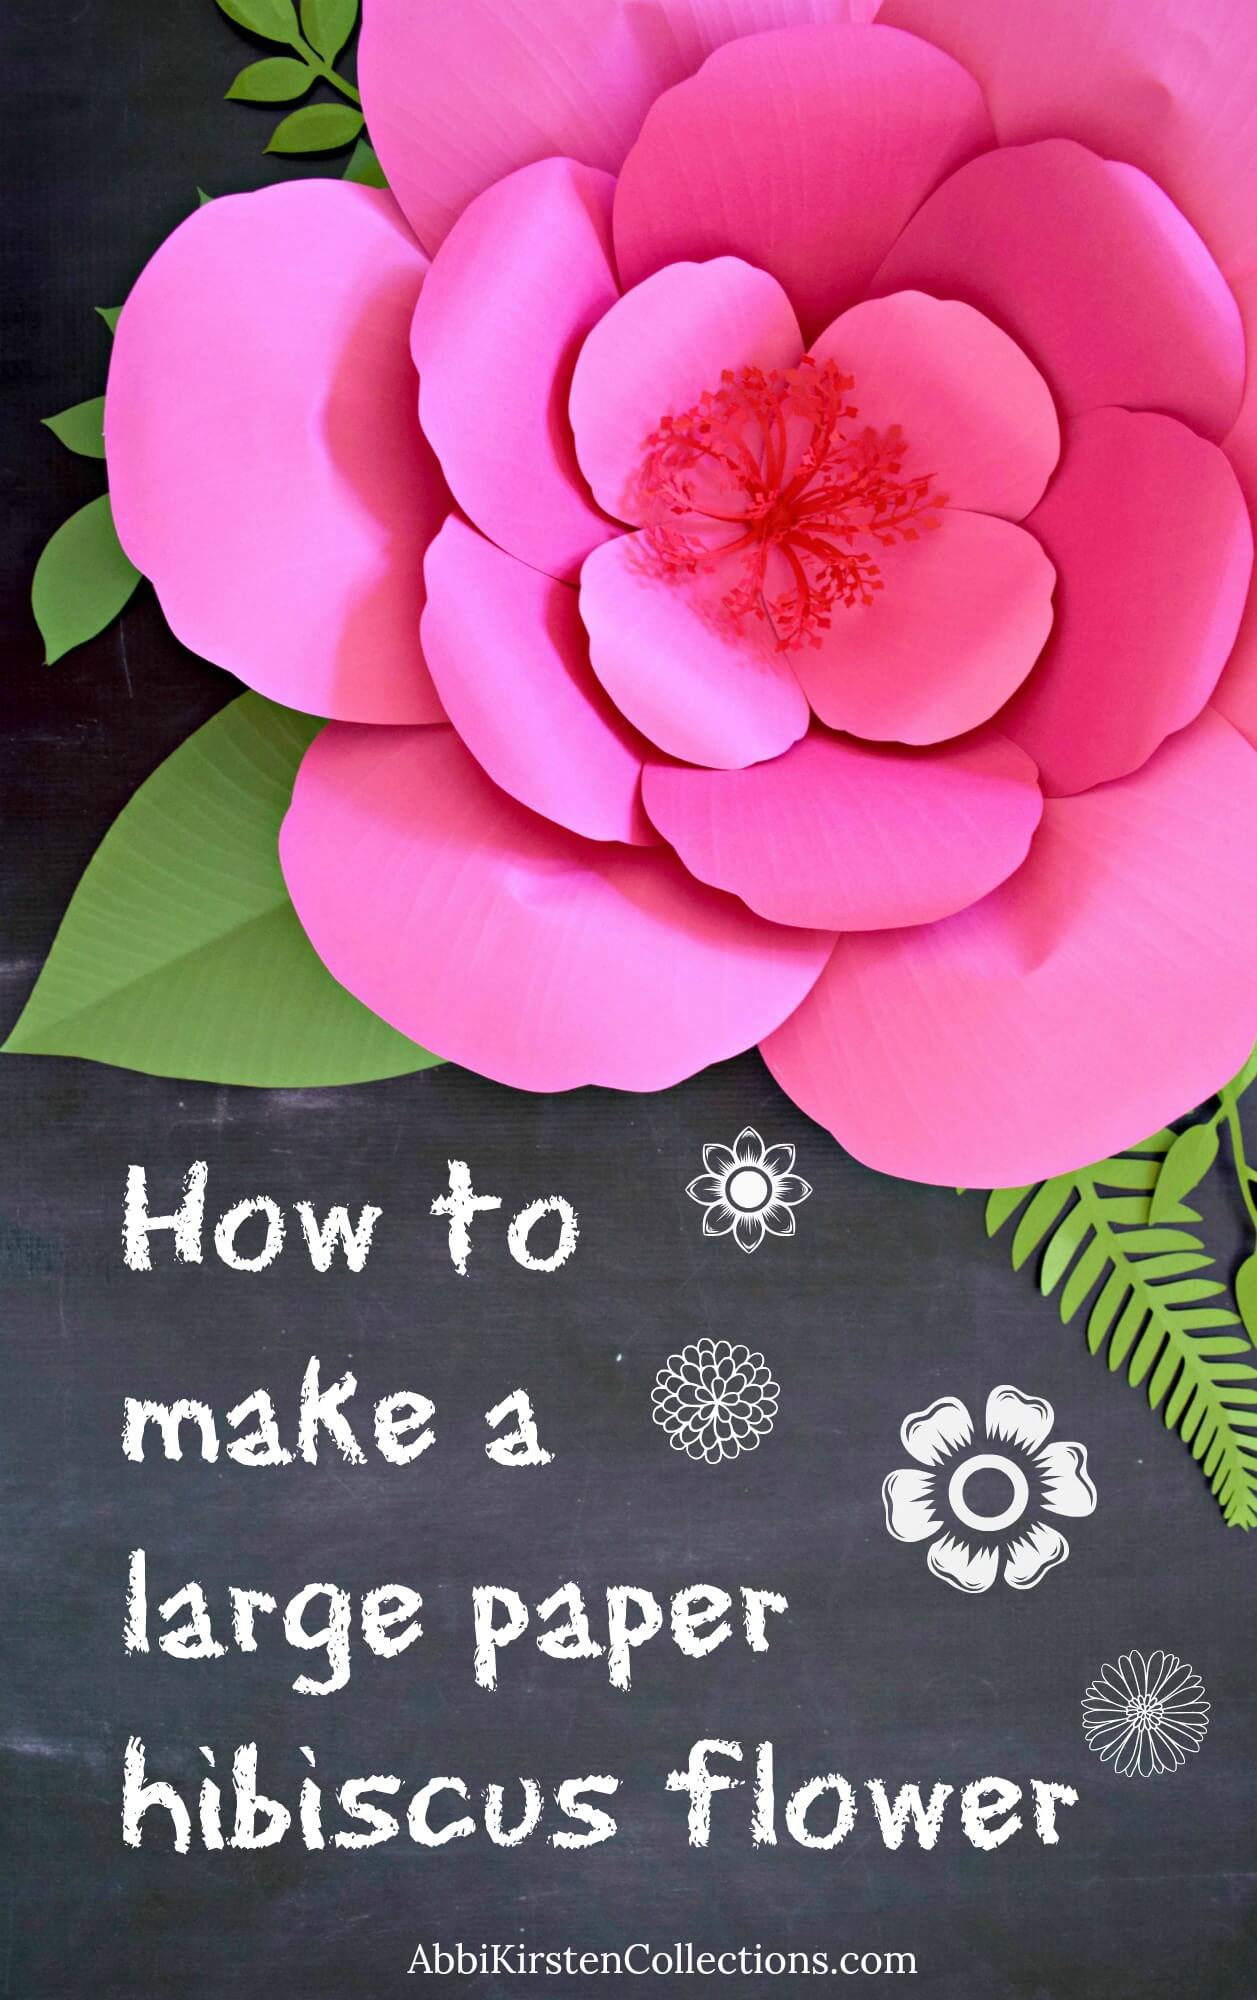 How to make large paper hibiscus flowers